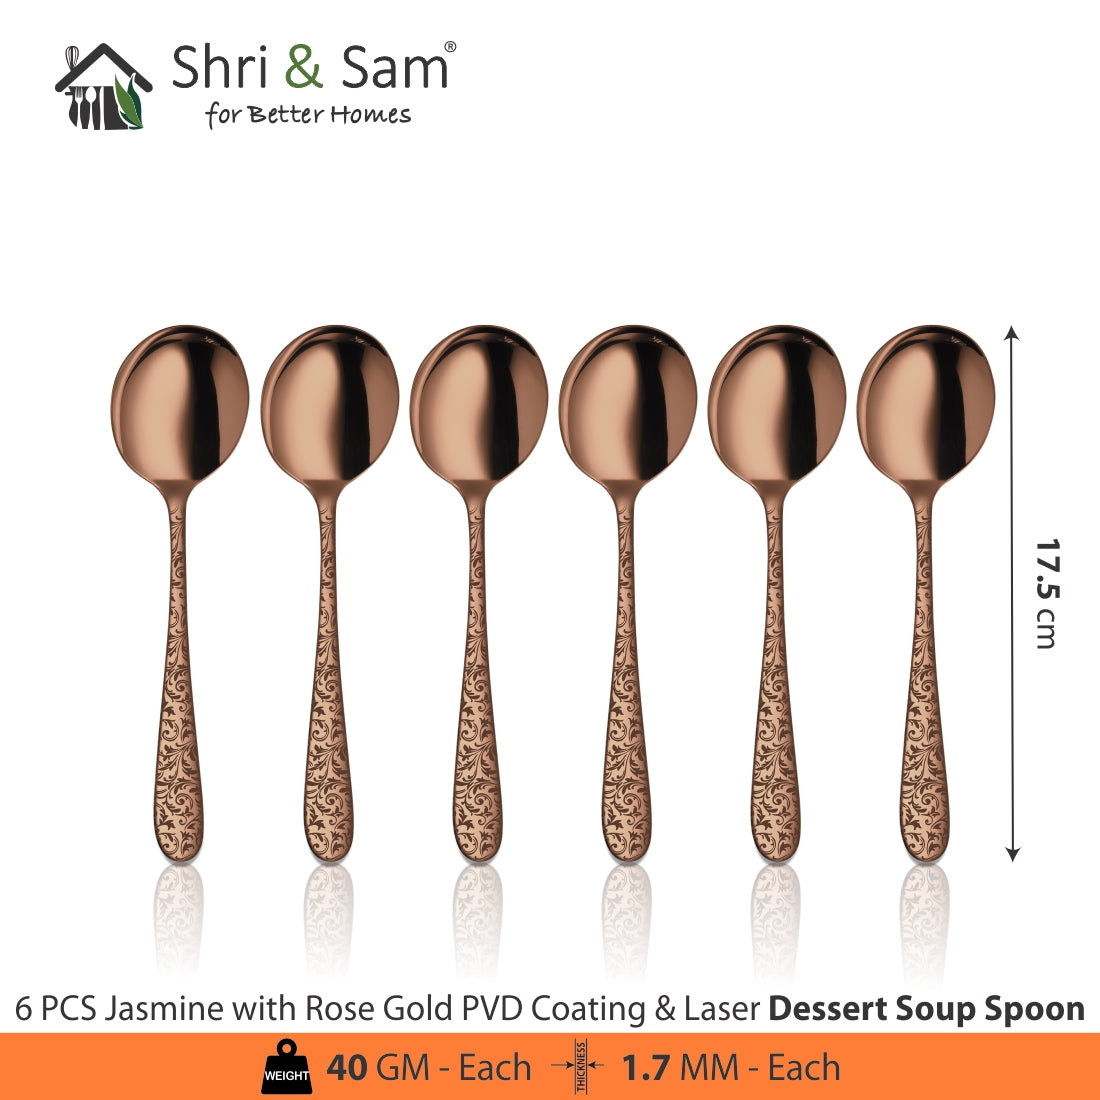 Stainless Steel Cutlery with Rose Gold PVD Coating & Laser Jasmine